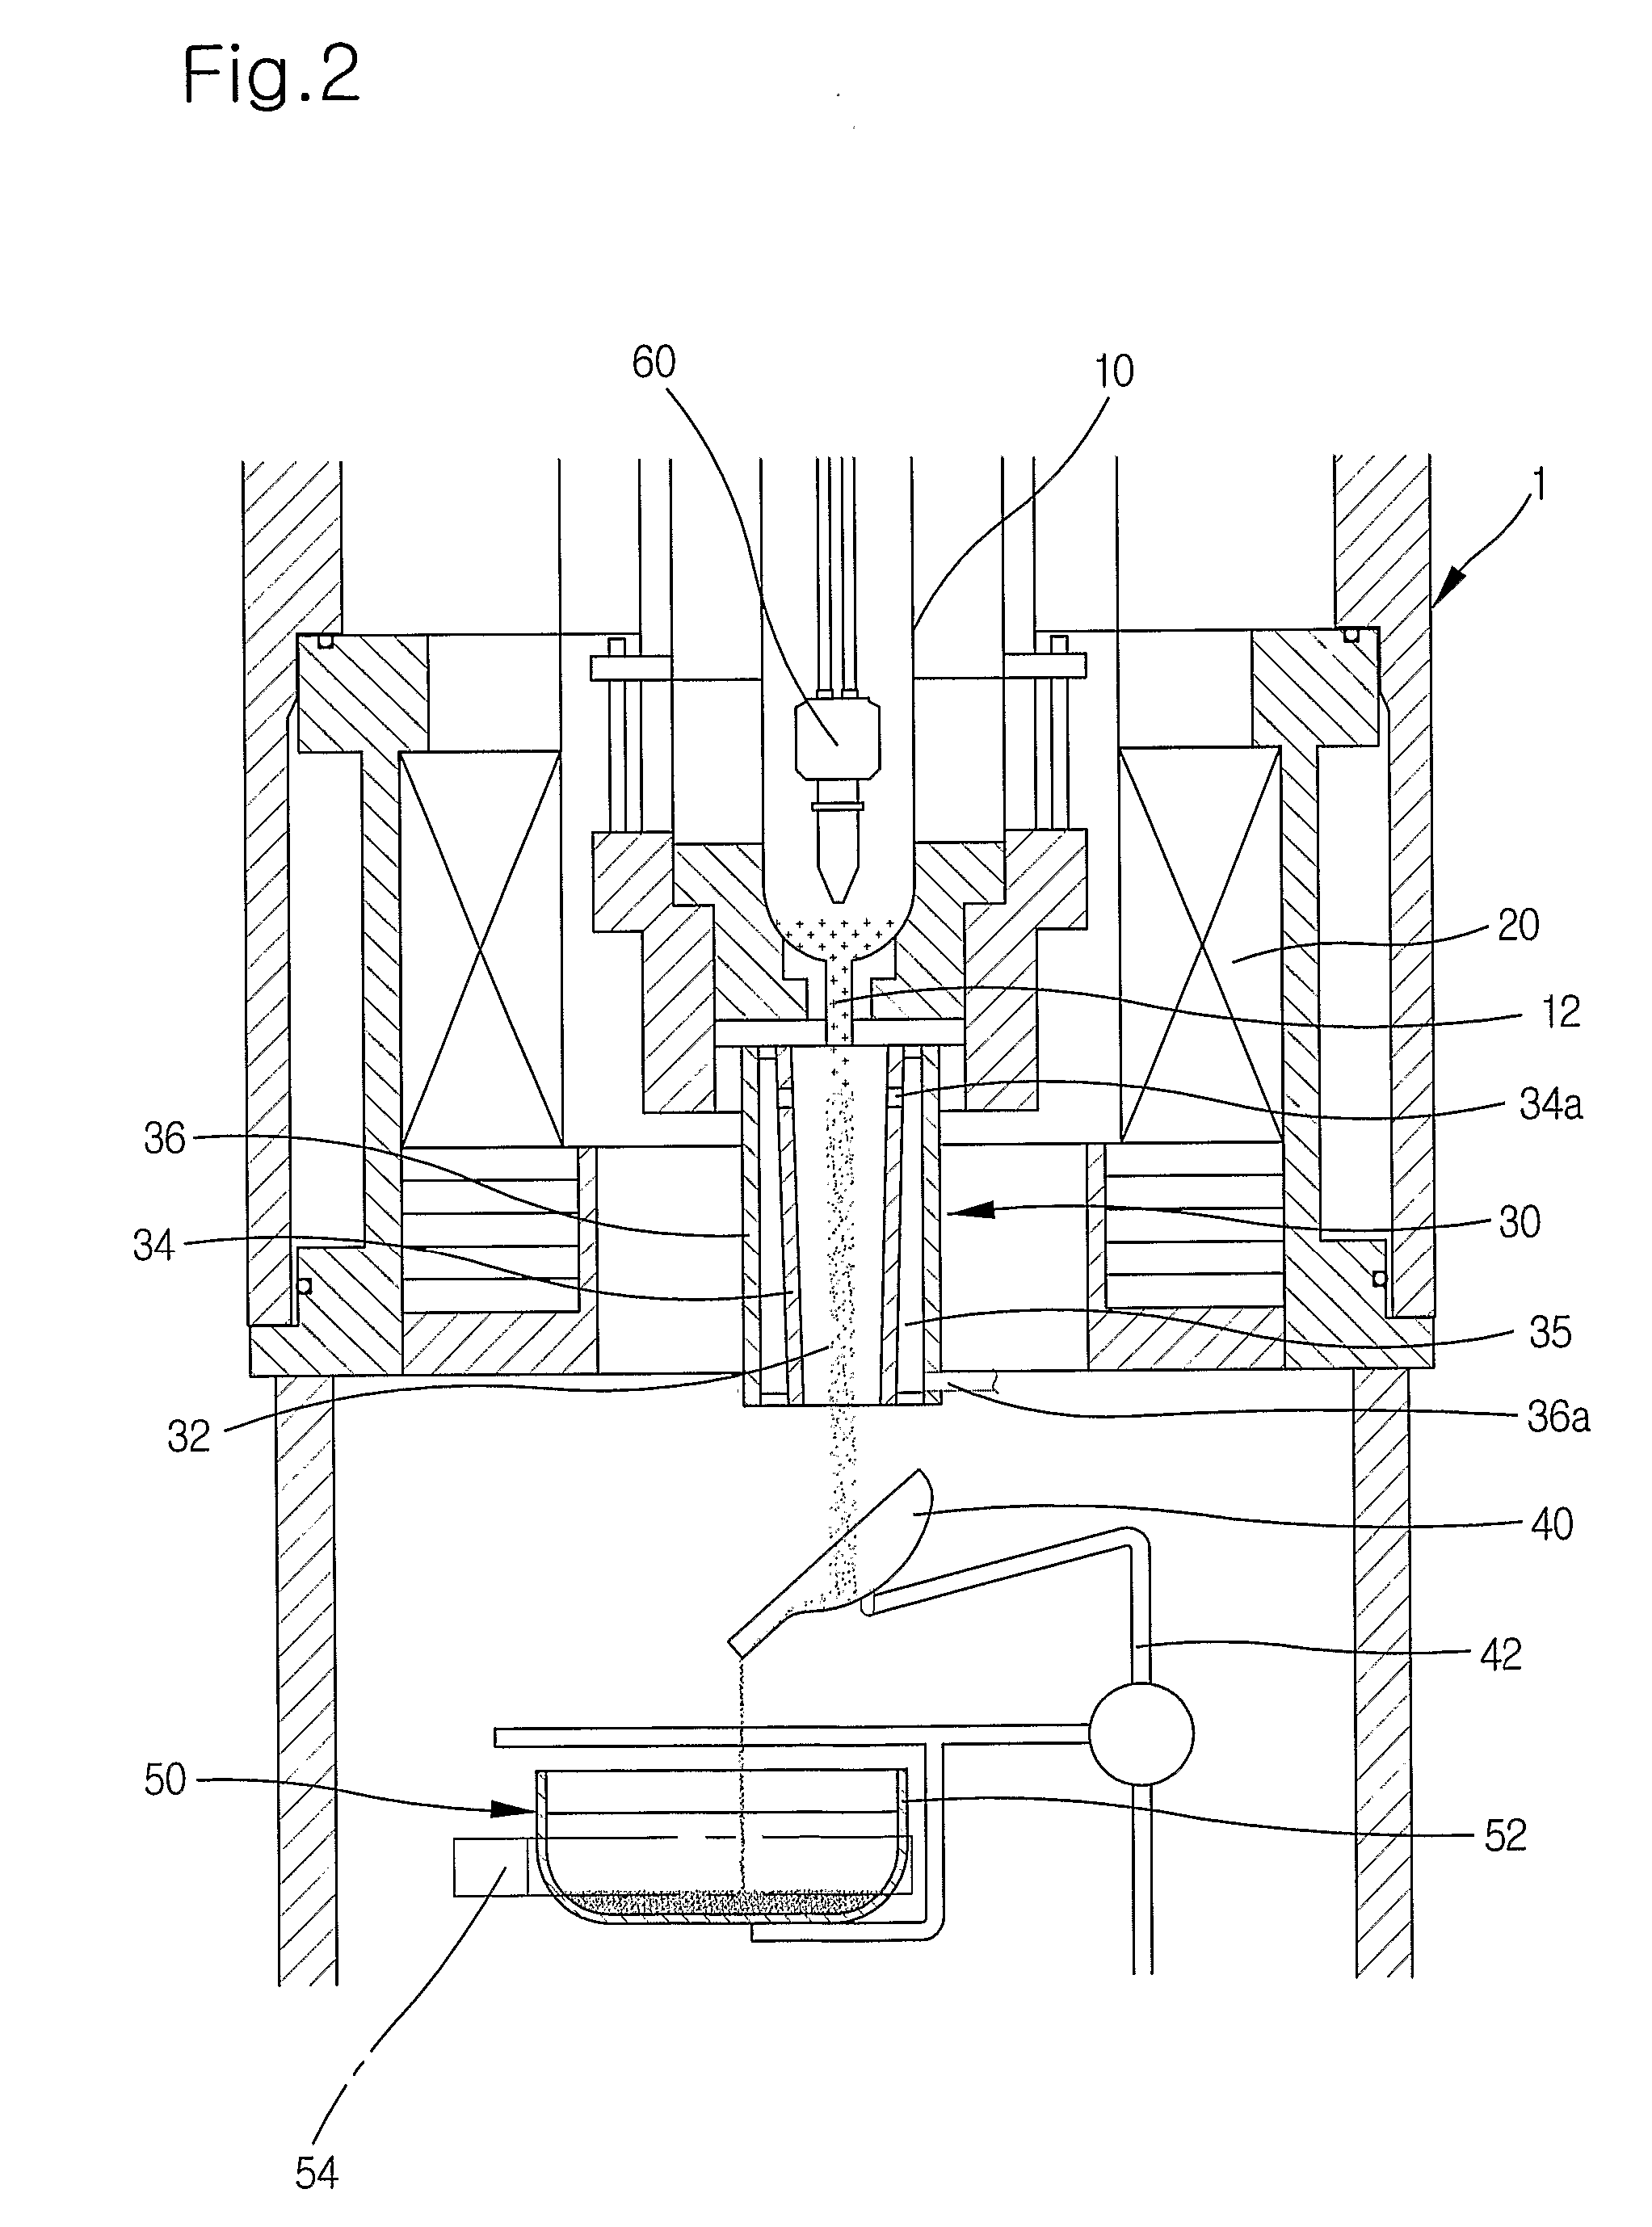 Method and apparatus for making semi-solid metal slurry